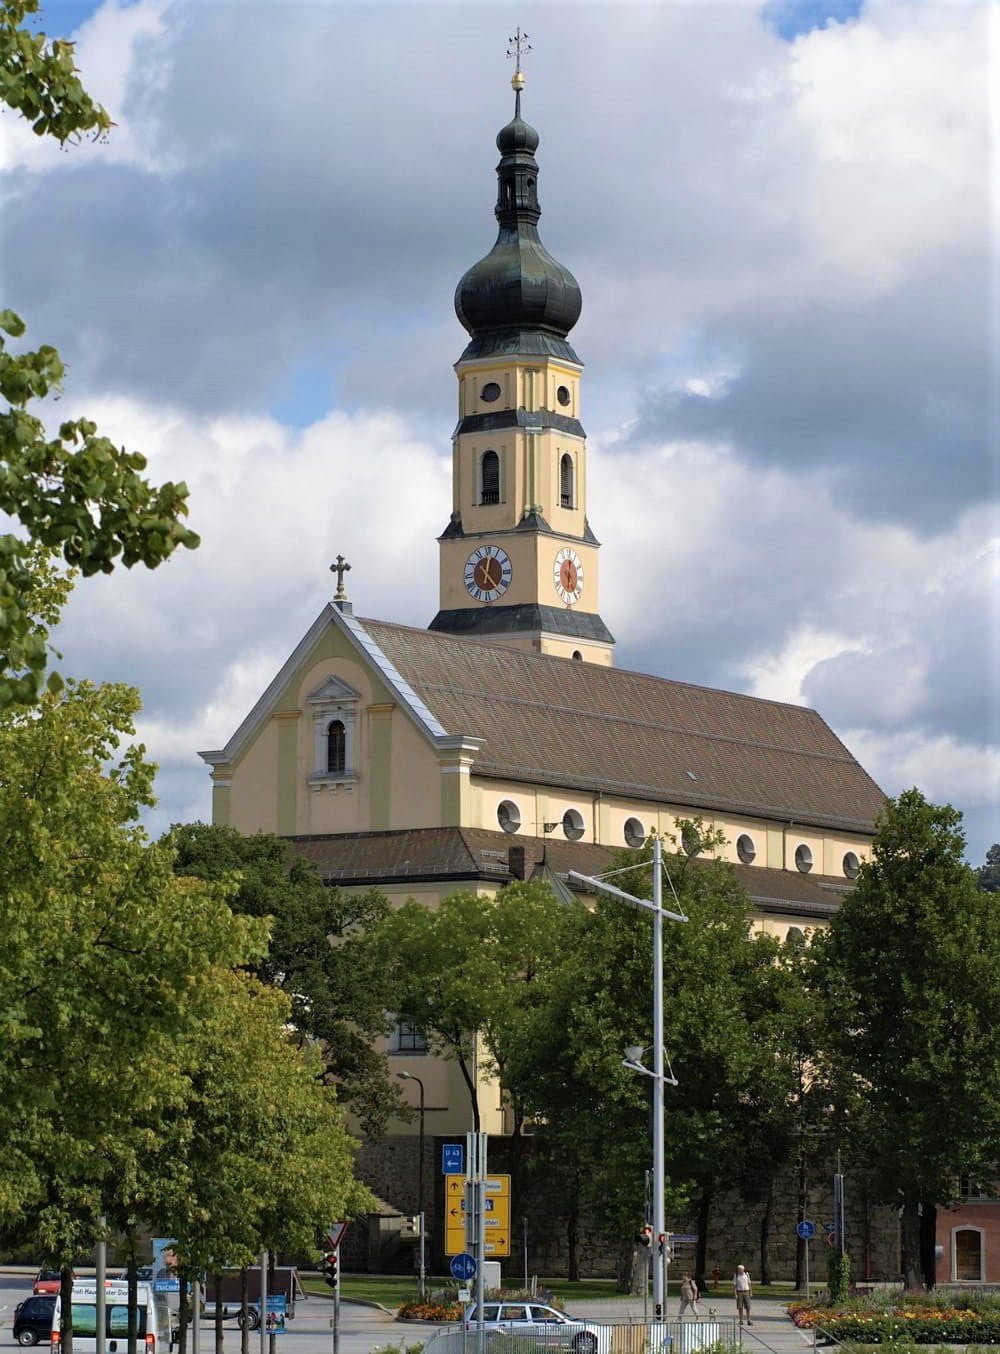 Places to visit in Deggendorf Germany